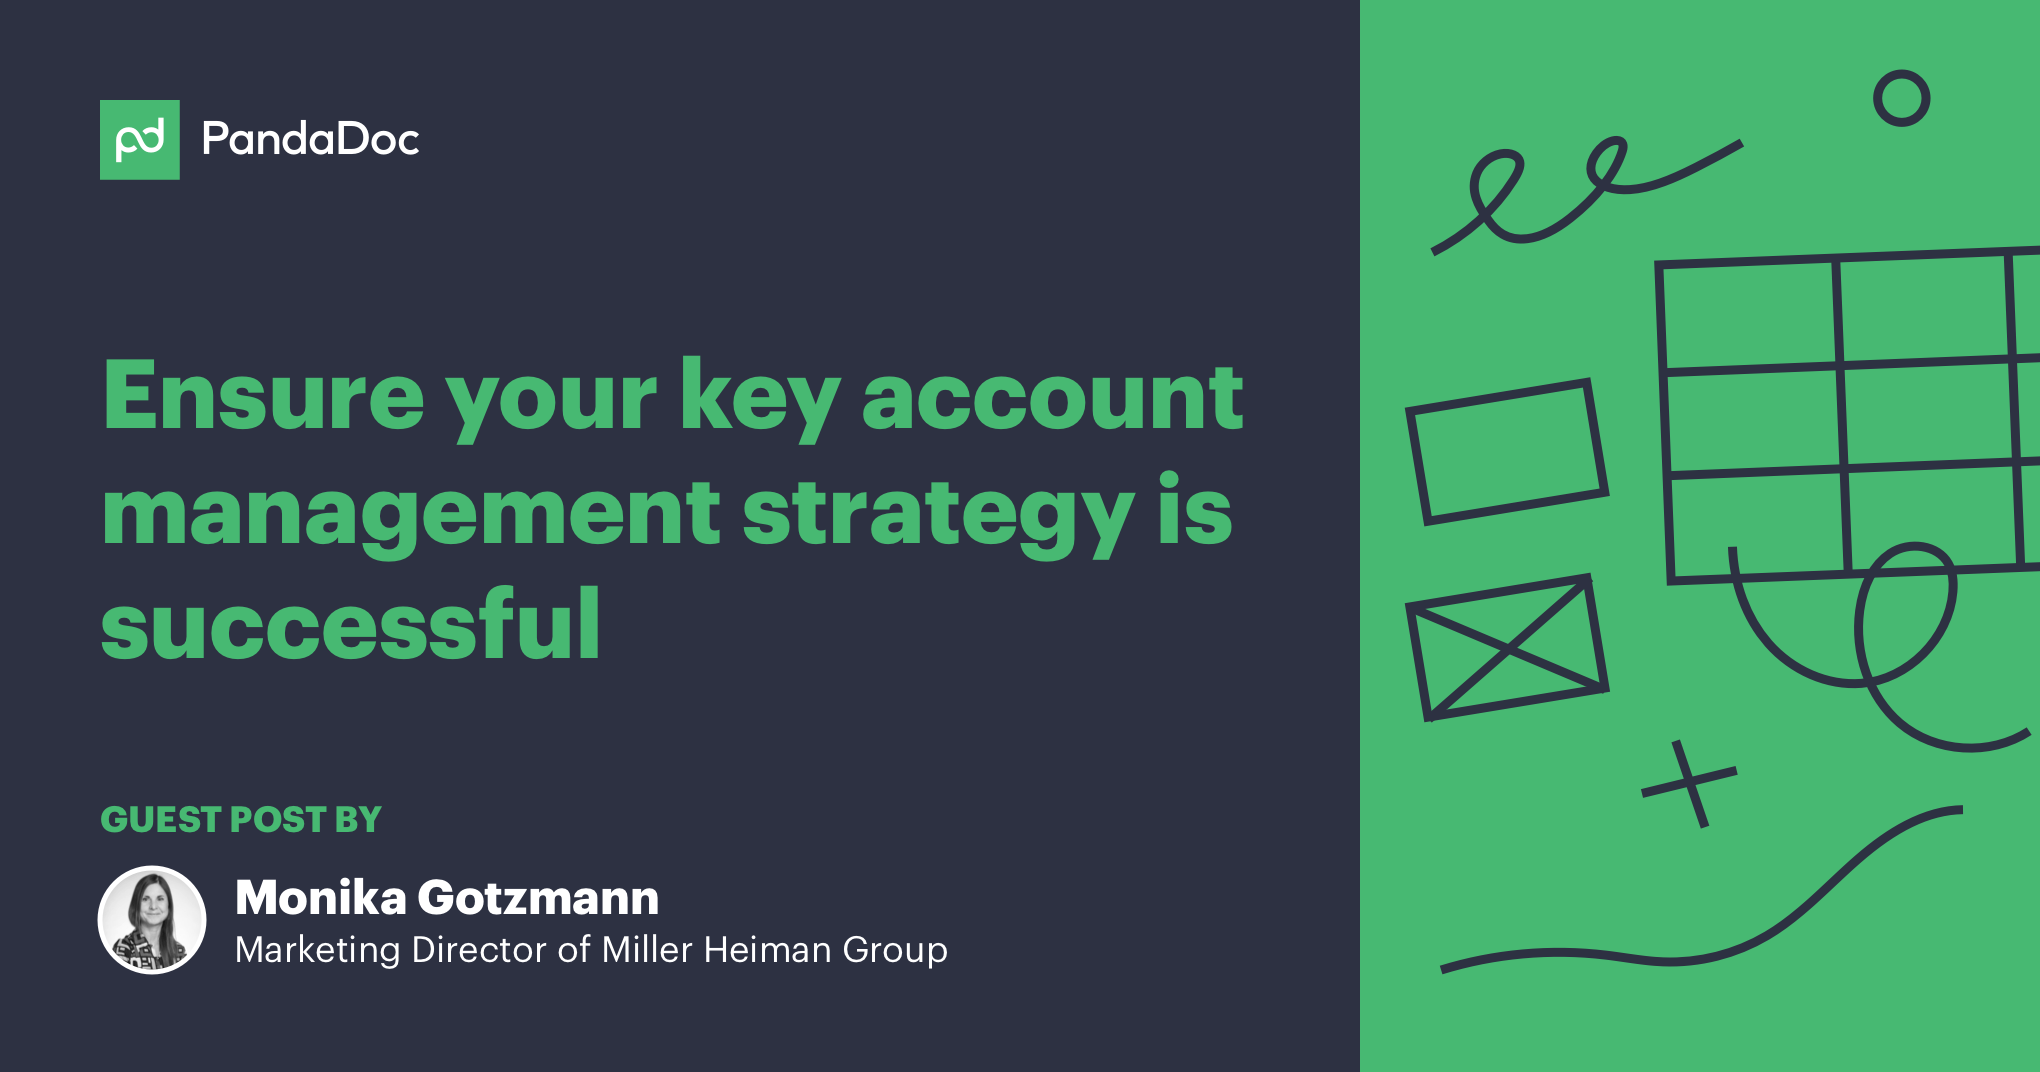 8 steps to ensure your key account management strategy is successful